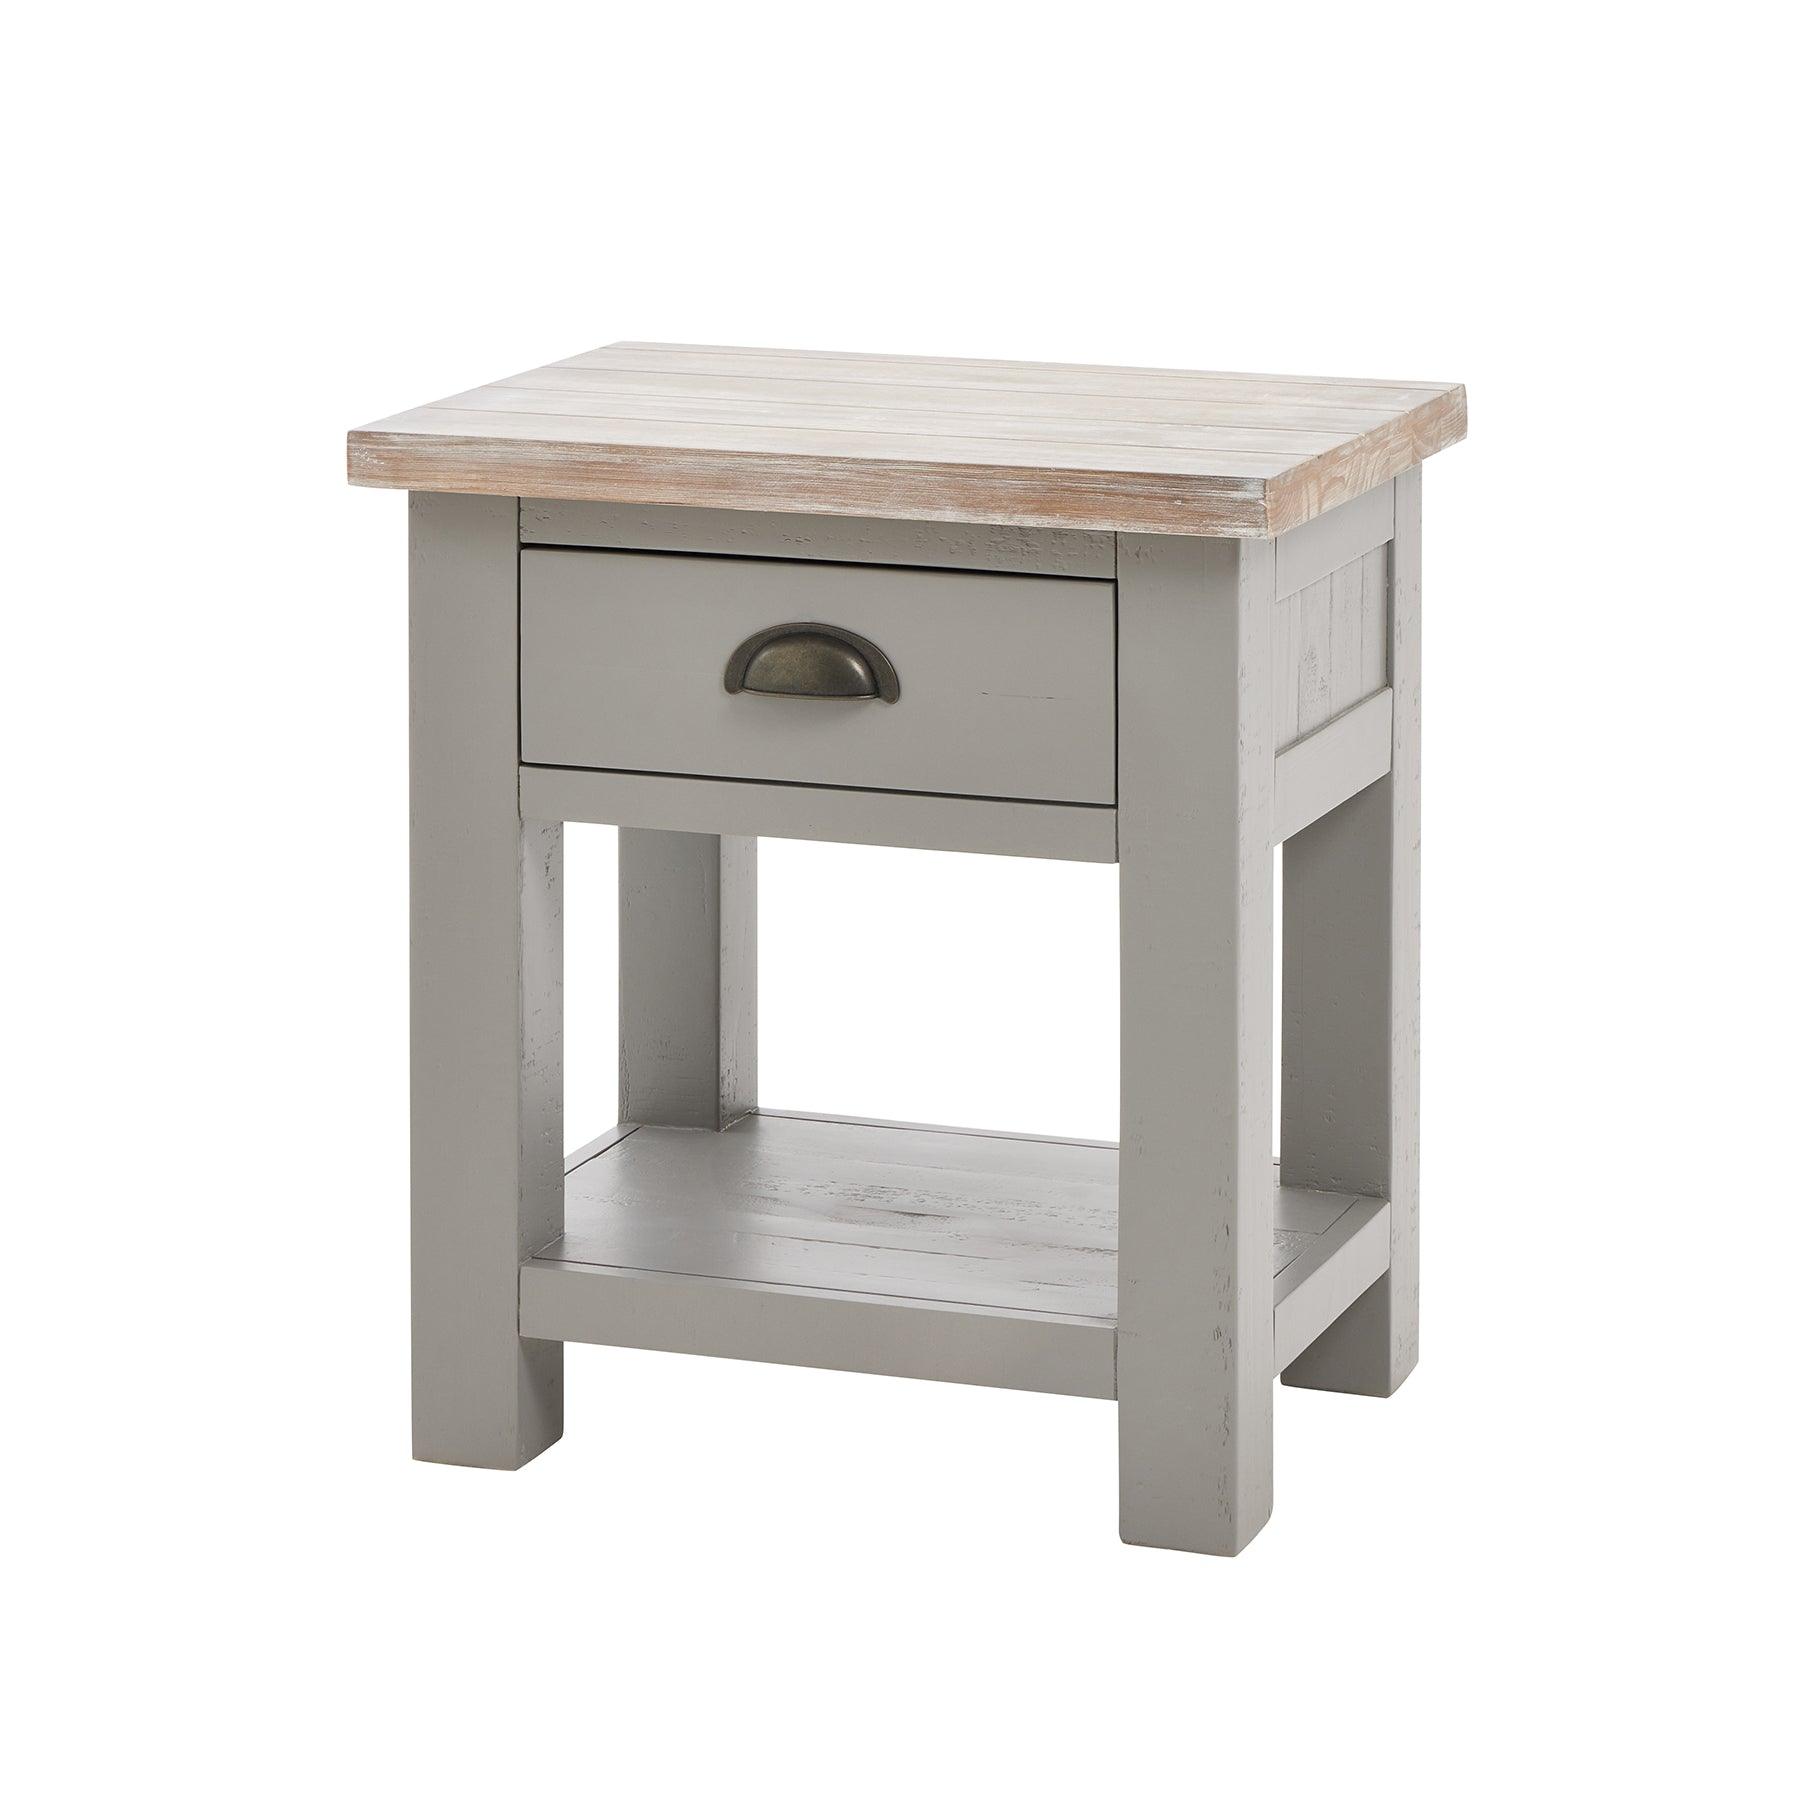 View The Oxley Collection Side Table information